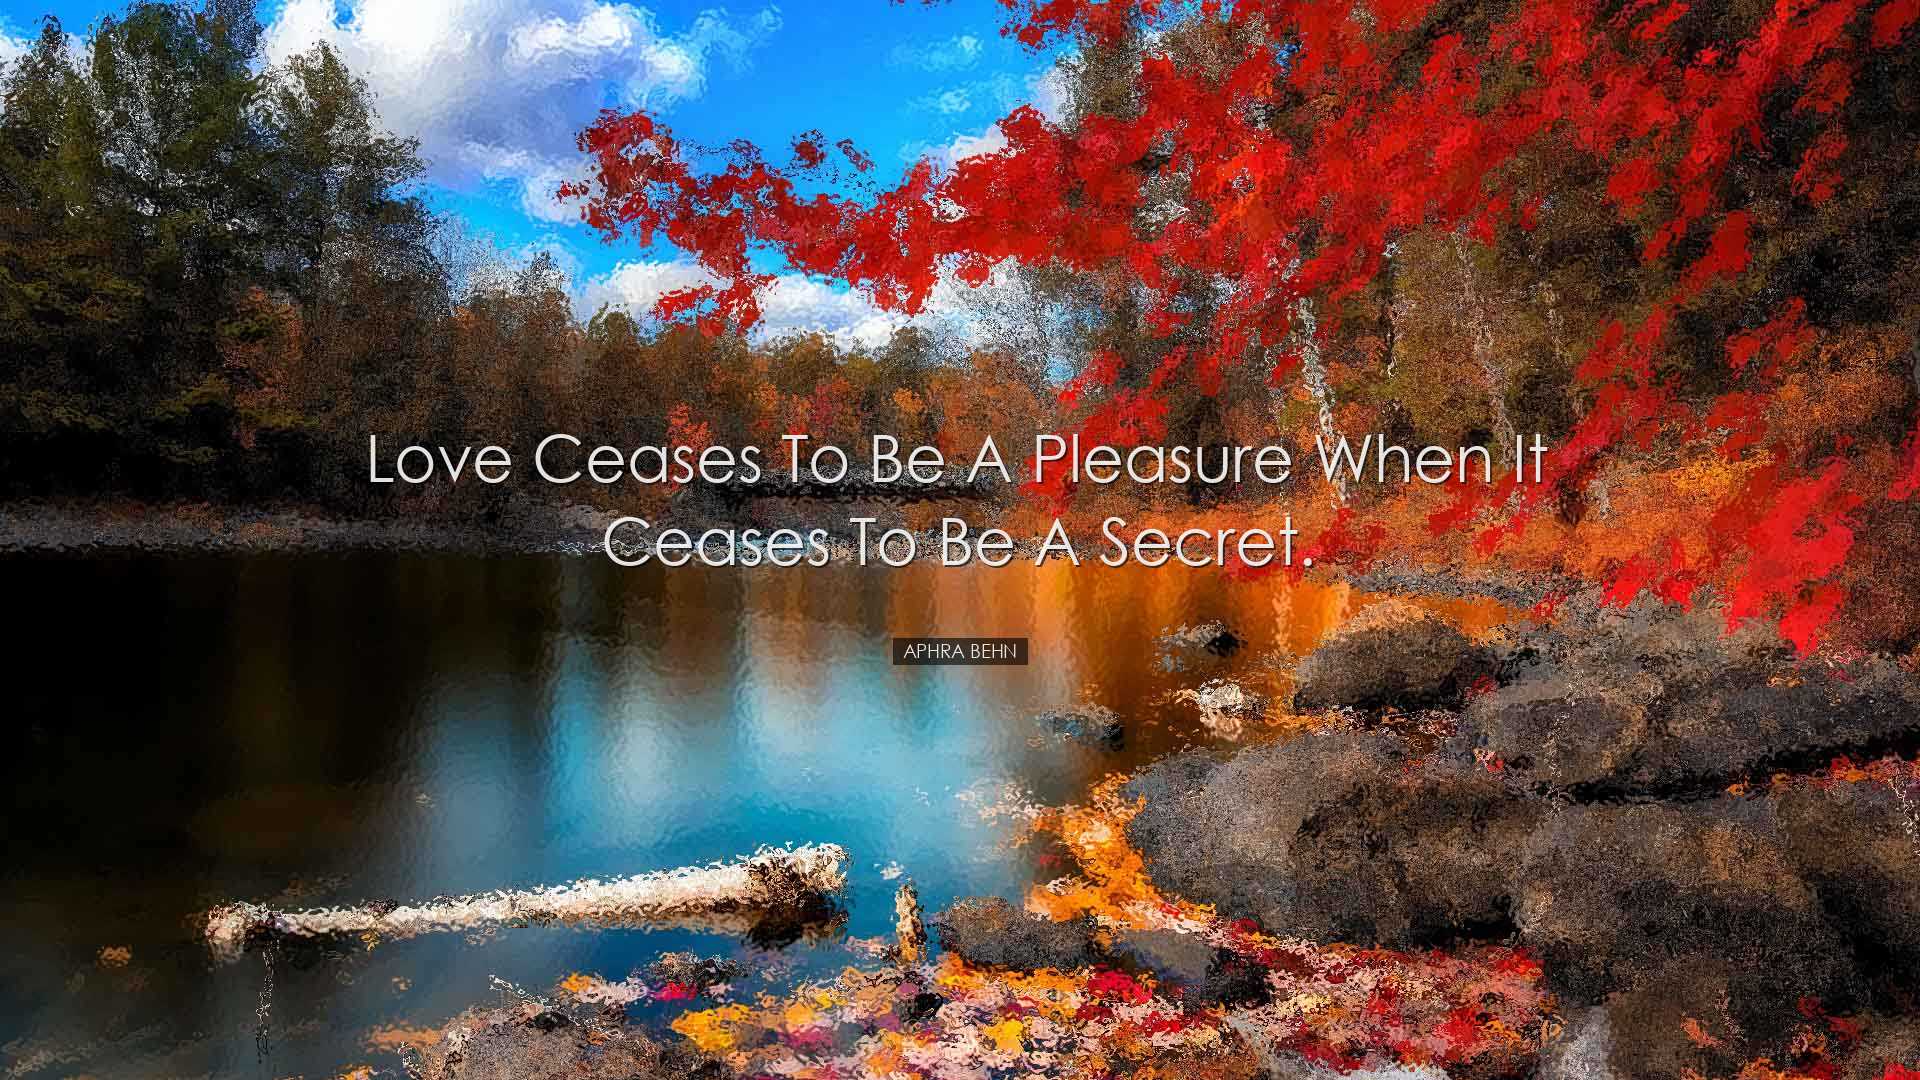 Love ceases to be a pleasure when it ceases to be a secret. - Aphr